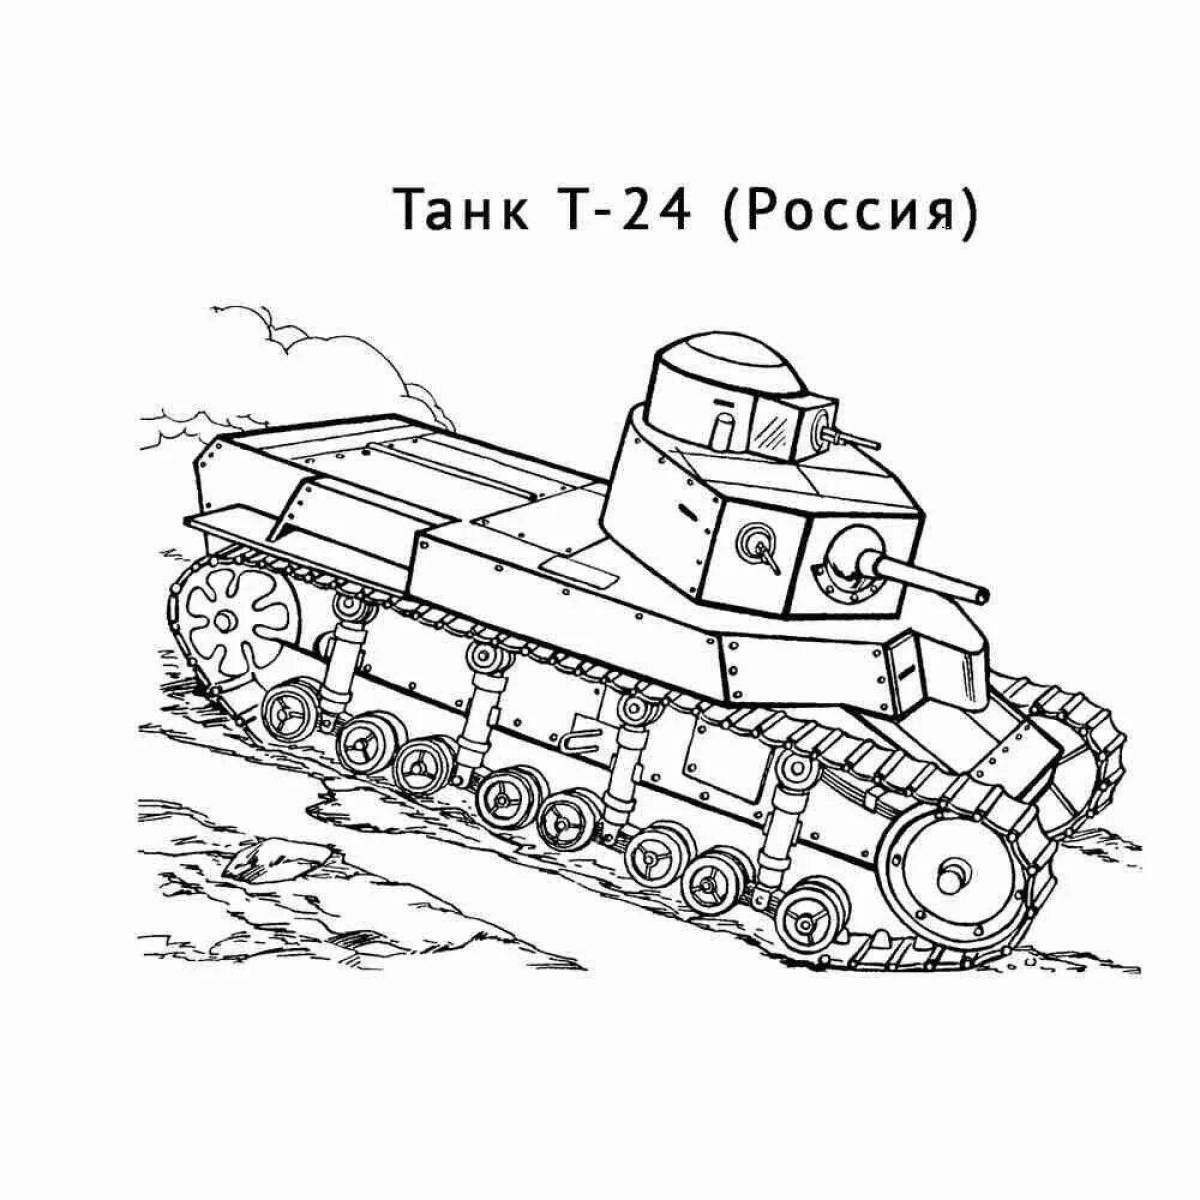 Coloring page amazing mendeleev's tank